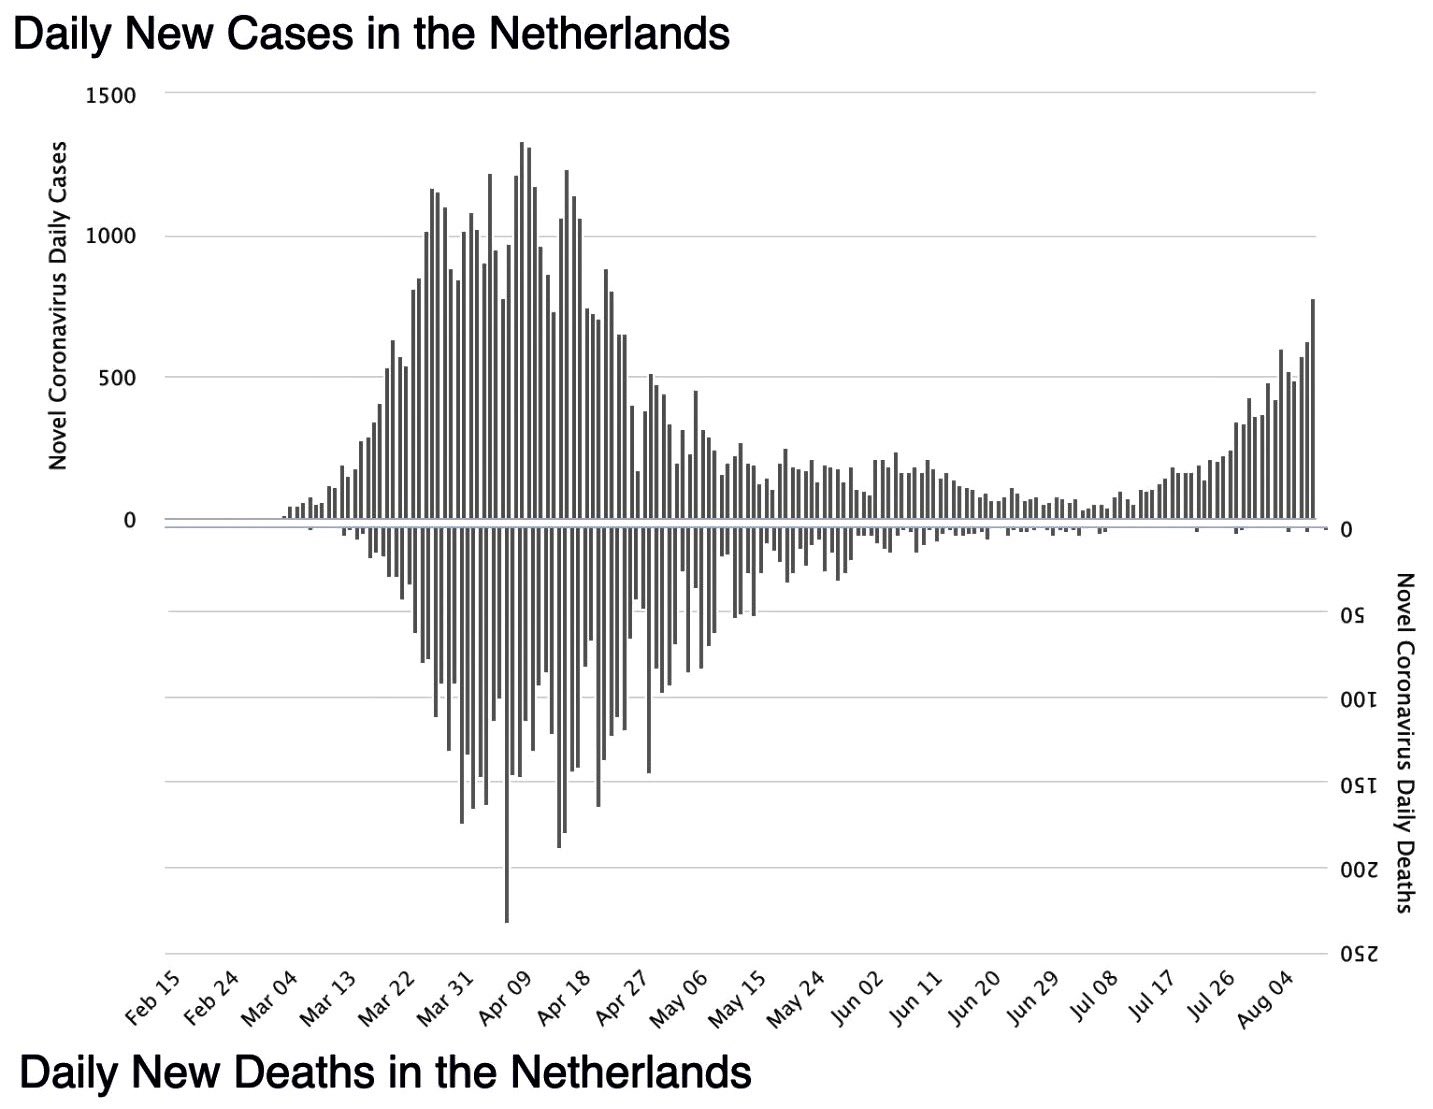 Corona_cases_and_deaths_NL